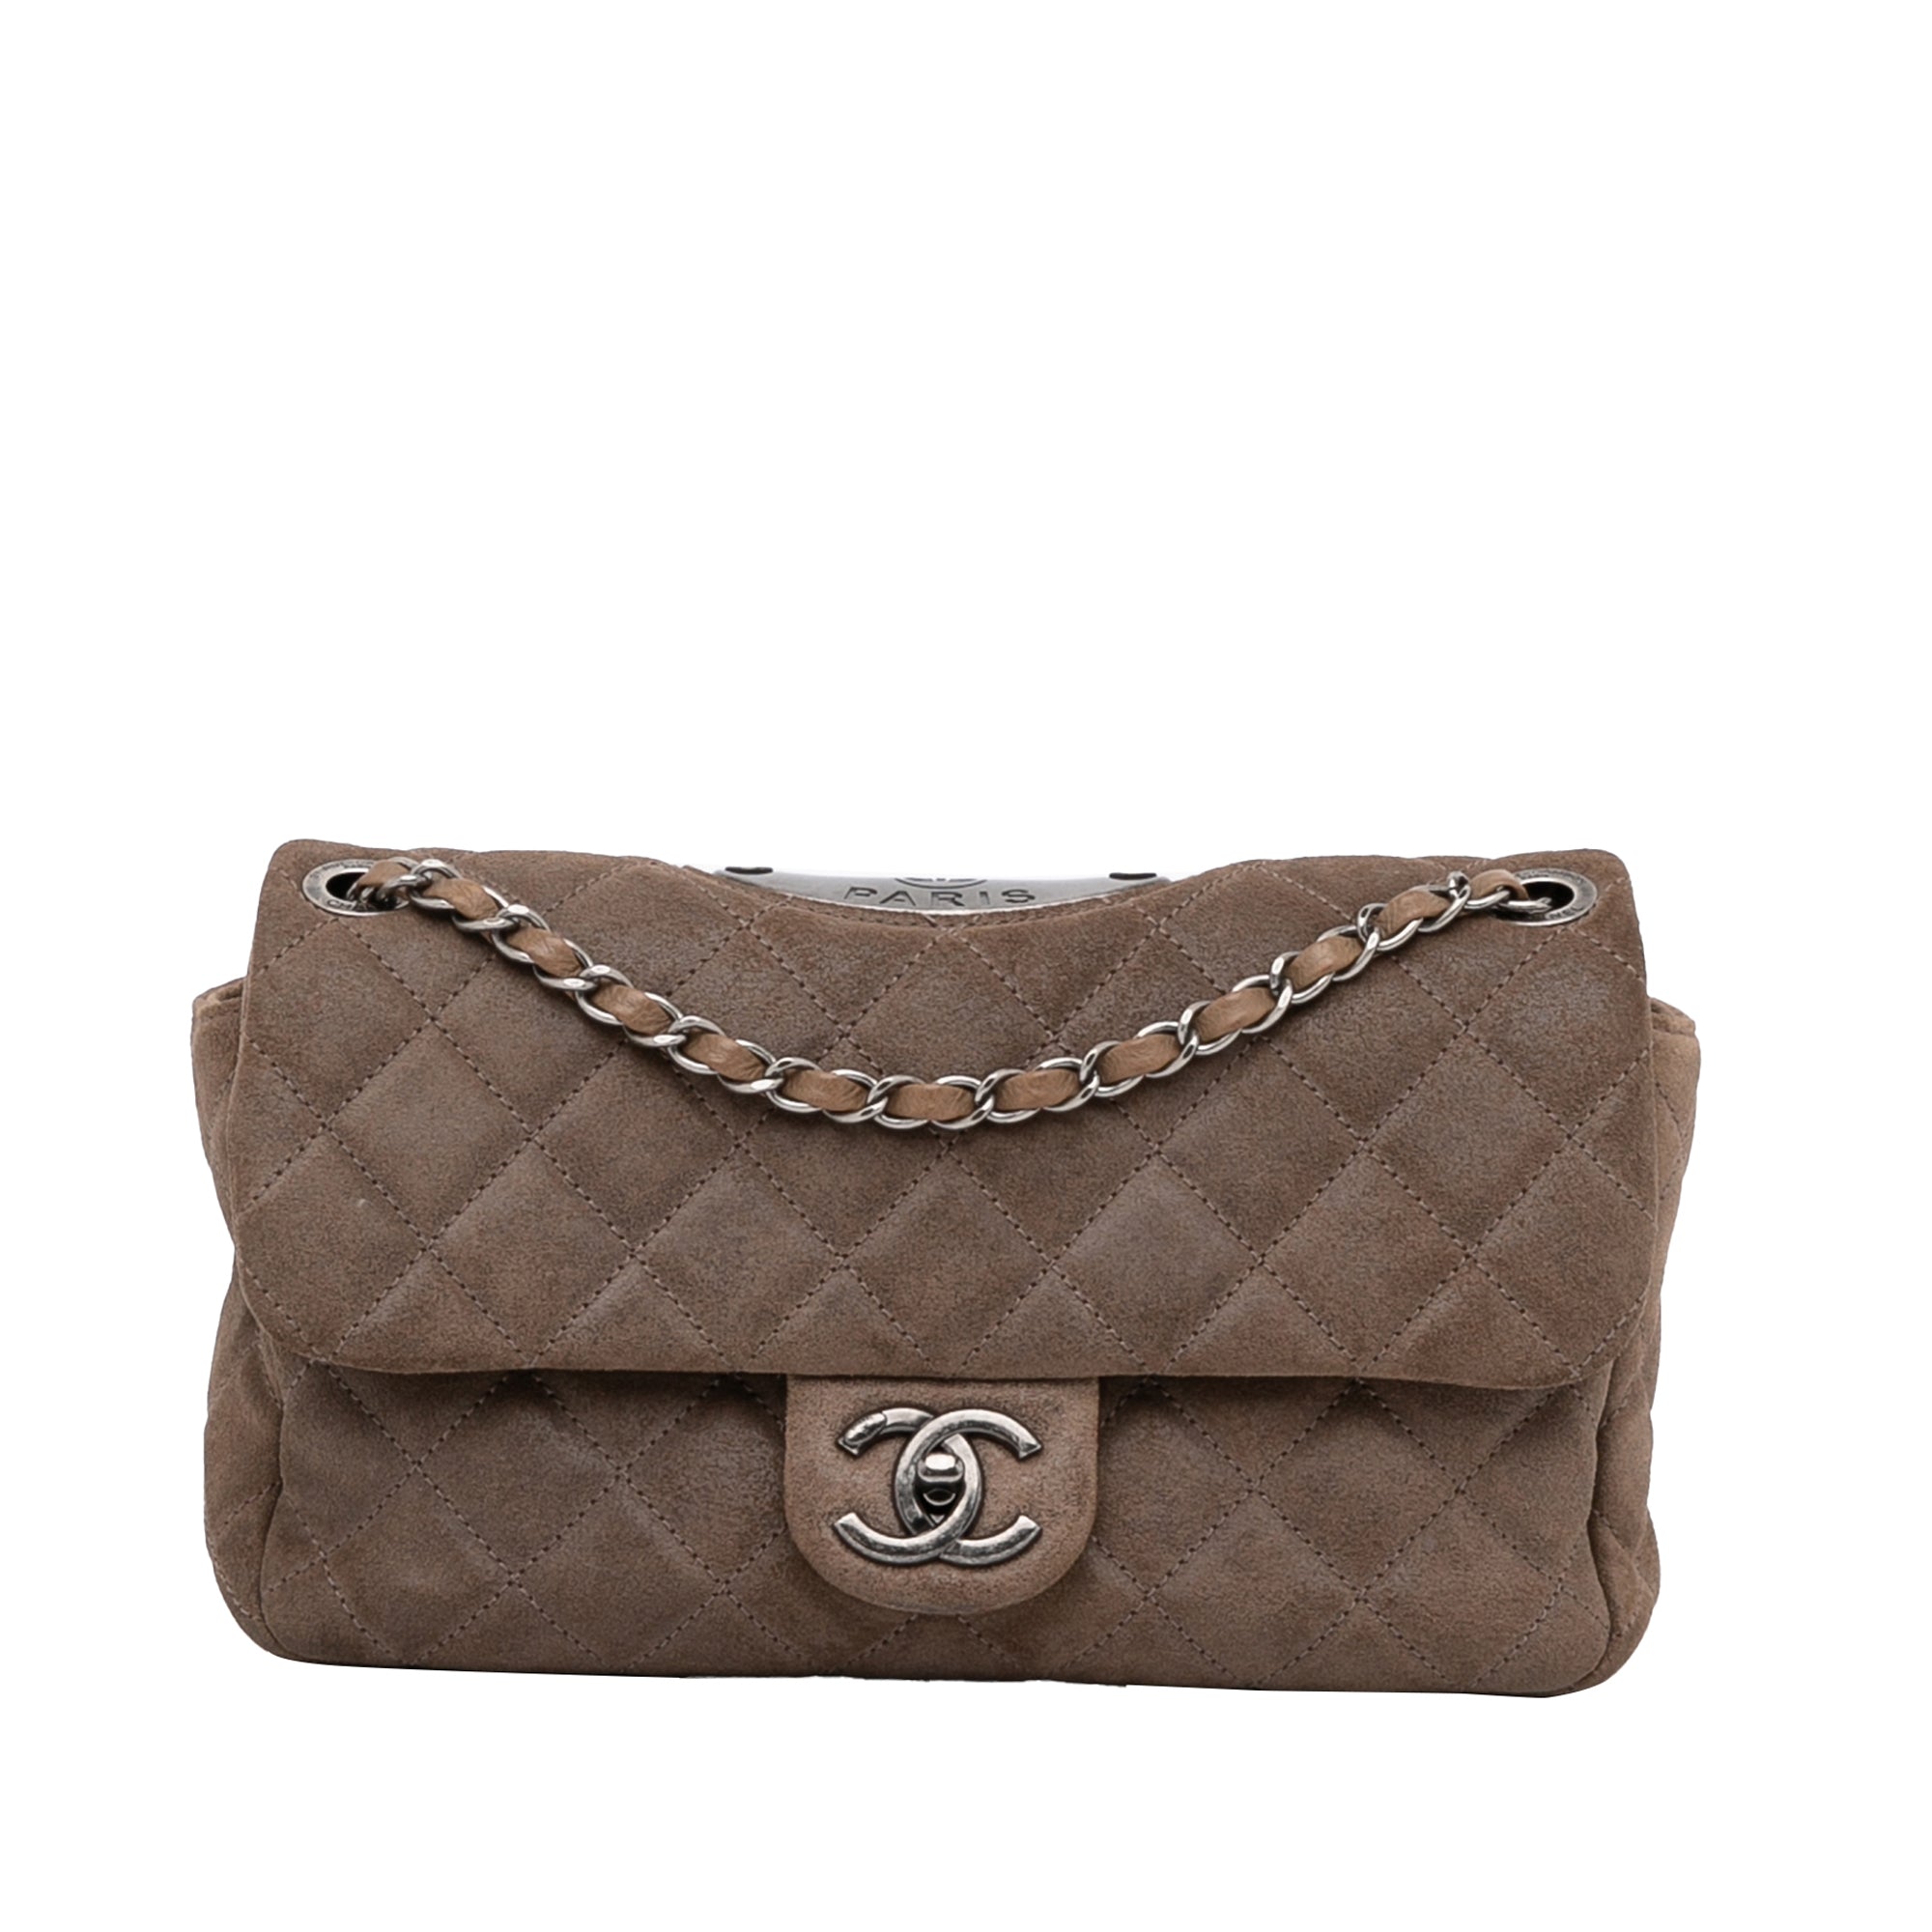 CHANEL Vintage Brown Suede Small Classic Double Flap Bag